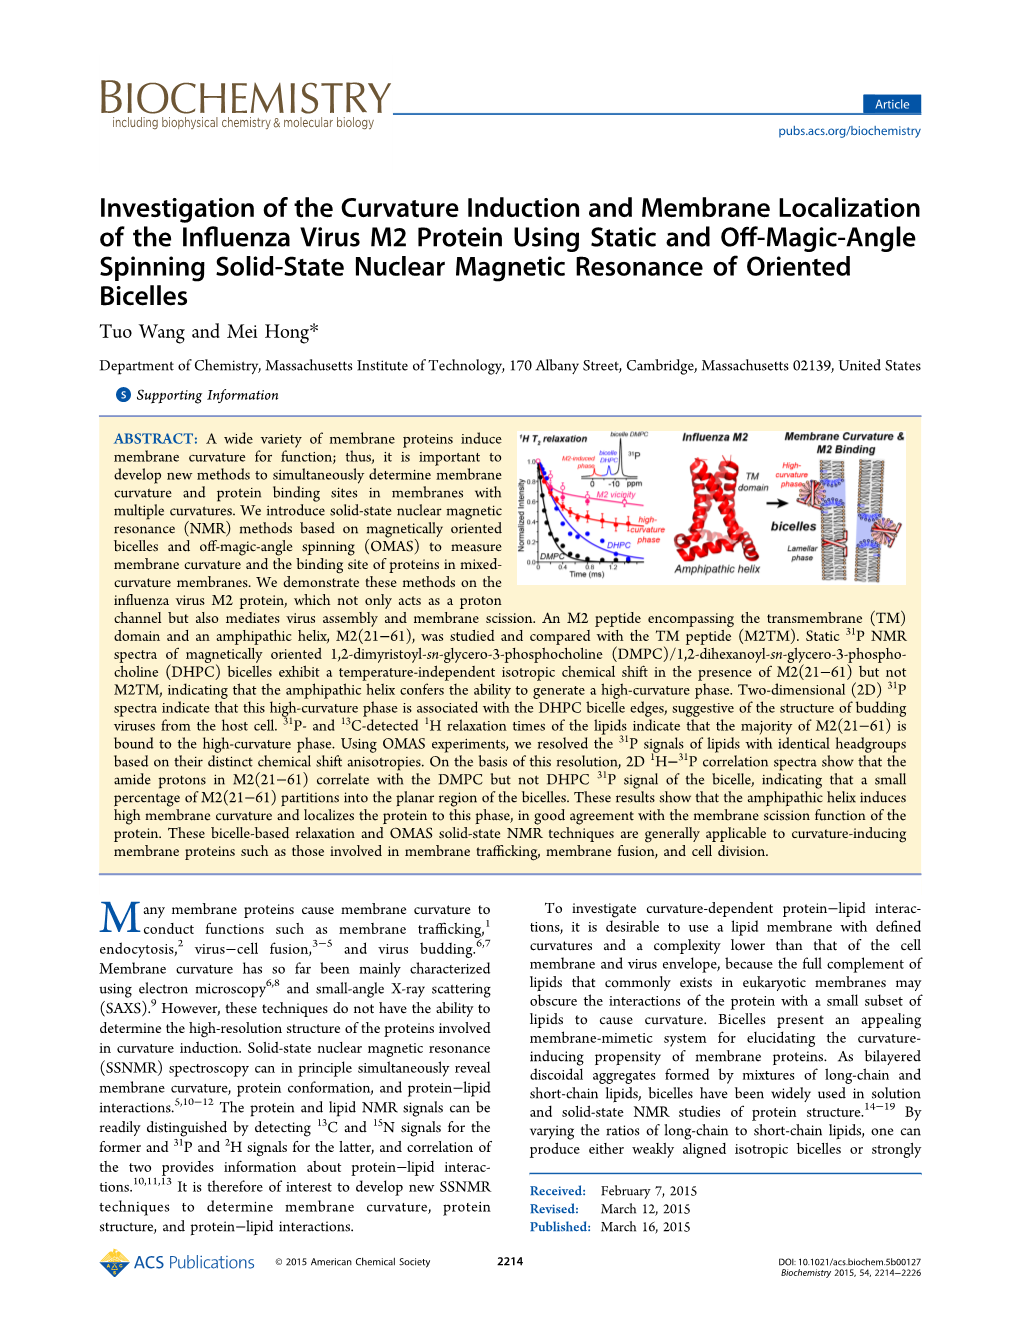 Investigation of the Curvature Induction and Membrane Localization of the Influenza Virus M2 Protein Using Static and Off-Magic